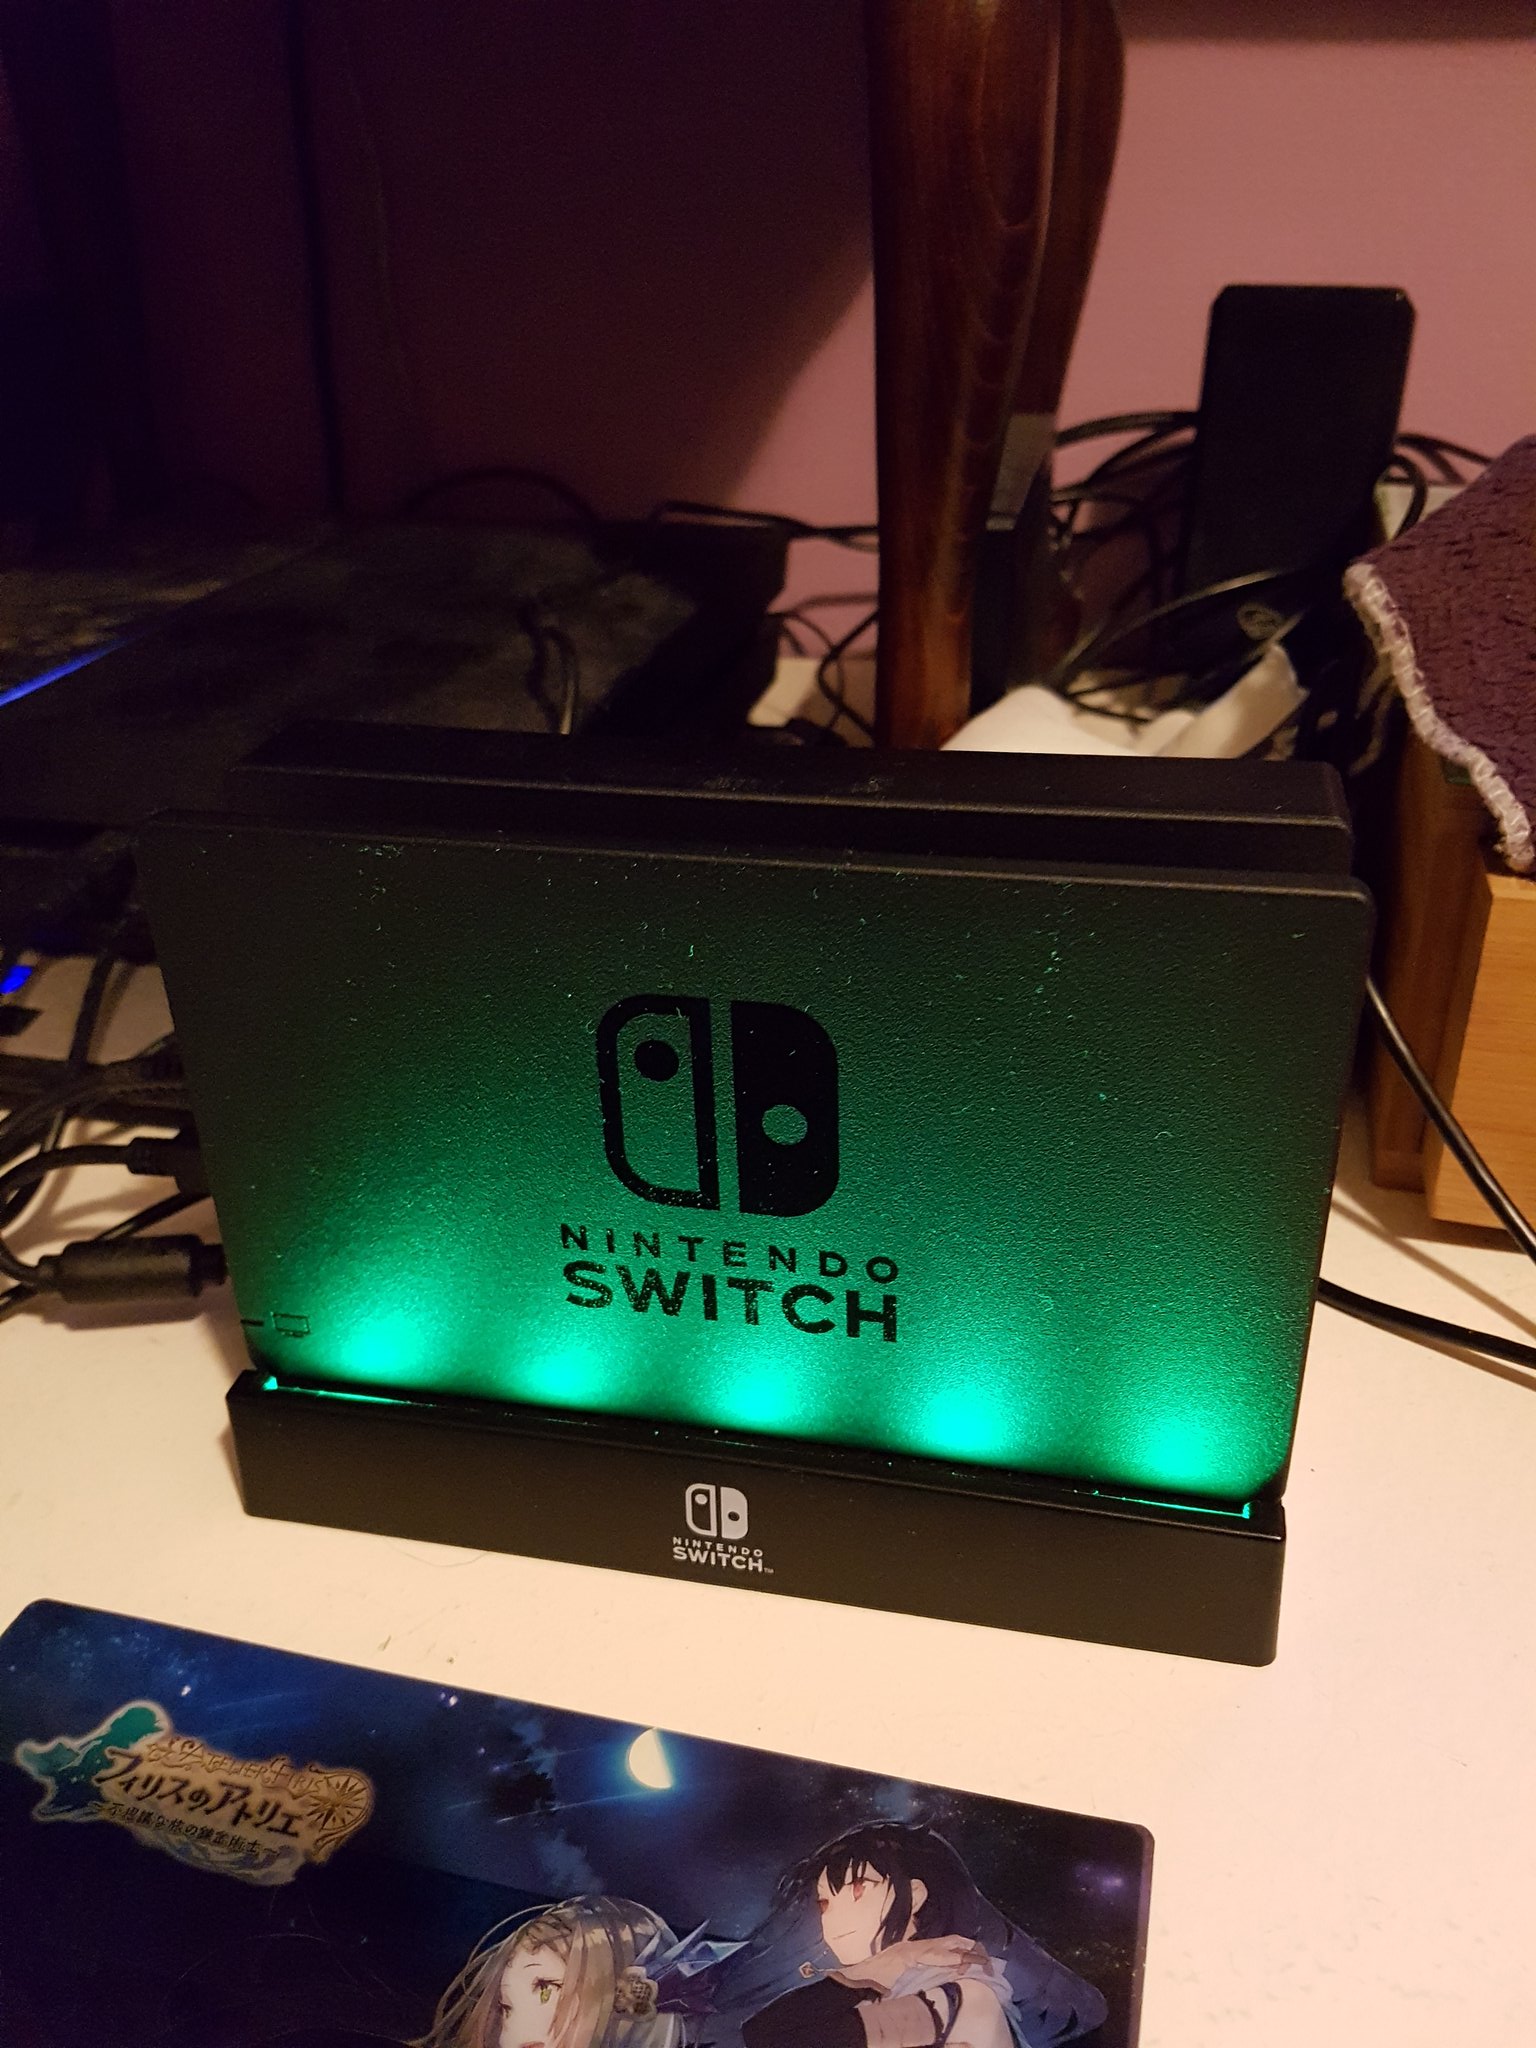 Ichikyo on Twitter: "How to self mod a Light Up Dock for something other than Mario and Zelda. Also to protect Nintendo Switch his defect dock can scratch screen.